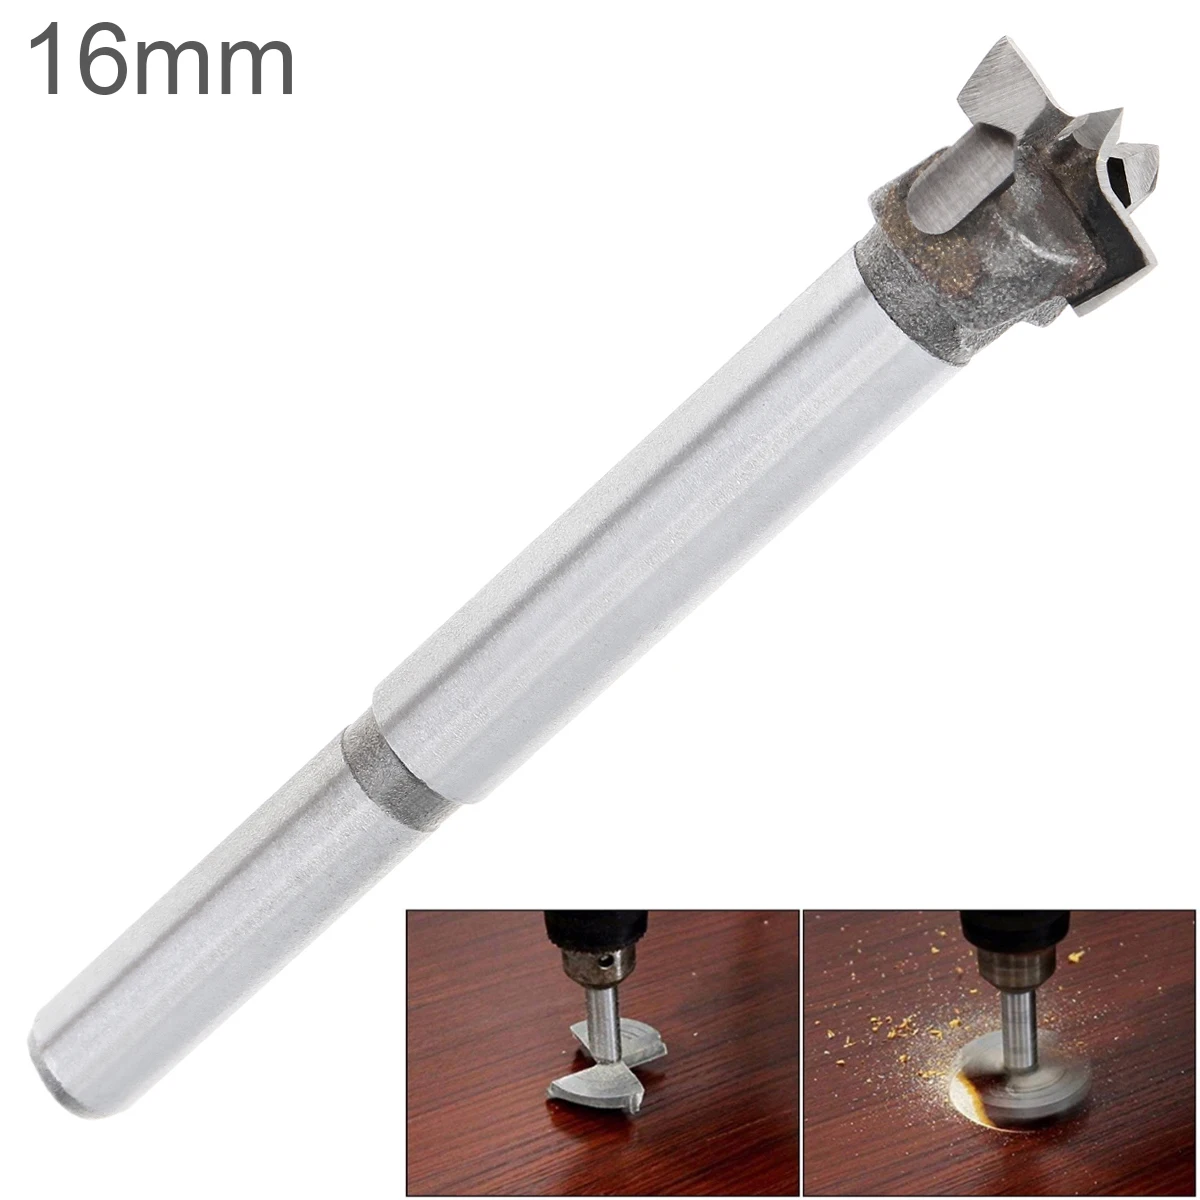 16mm Tungsten Steel Hard Alloy Wood Drill Bits Woodworking Hole Opener for Drilling on Plasterboard /Plastic Board /Wooden Board plasterboard planer manual plasterboard carpenter chamfer tool edge plane for gypsum board wood board for wood edge trimming